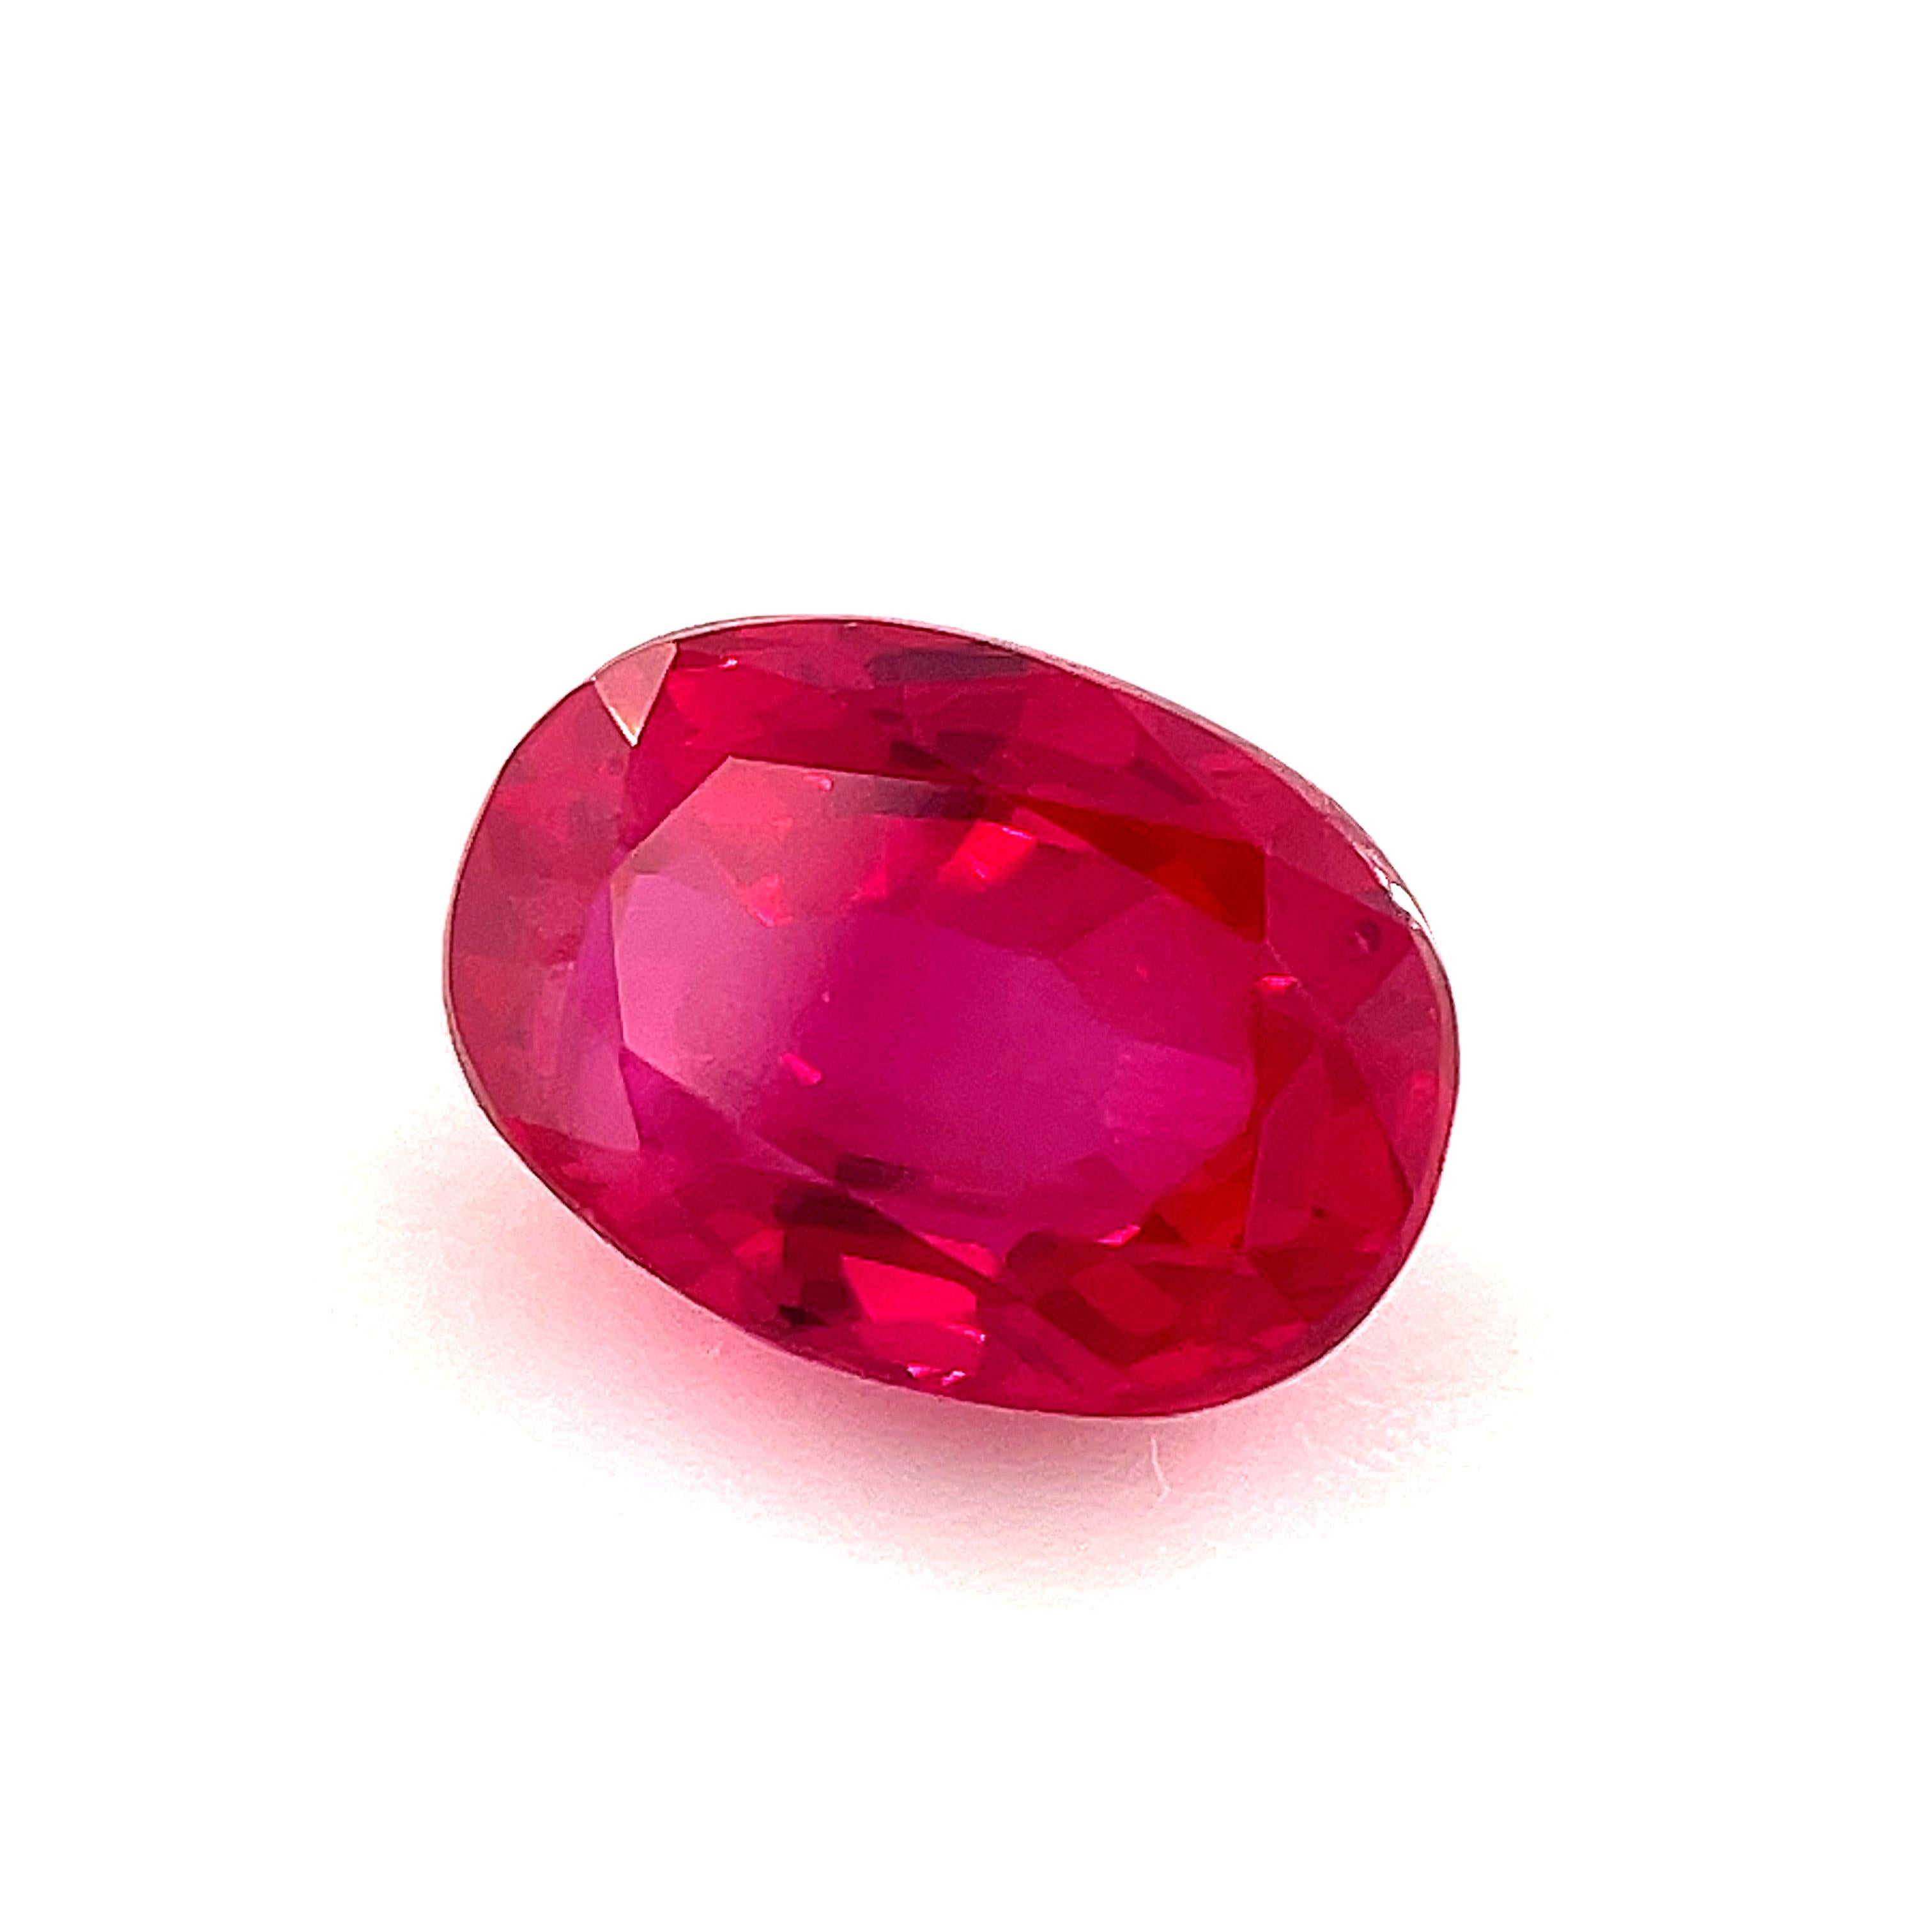 This beautiful, vivid red ruby would make a spectacular ring! It weighs .92 carat and has a bright, almost electric cherry red color with gorgeous pinkish highlights. It is eye clean and a real gem! This ruby measures 6.29 x 4.47 millimeters and is